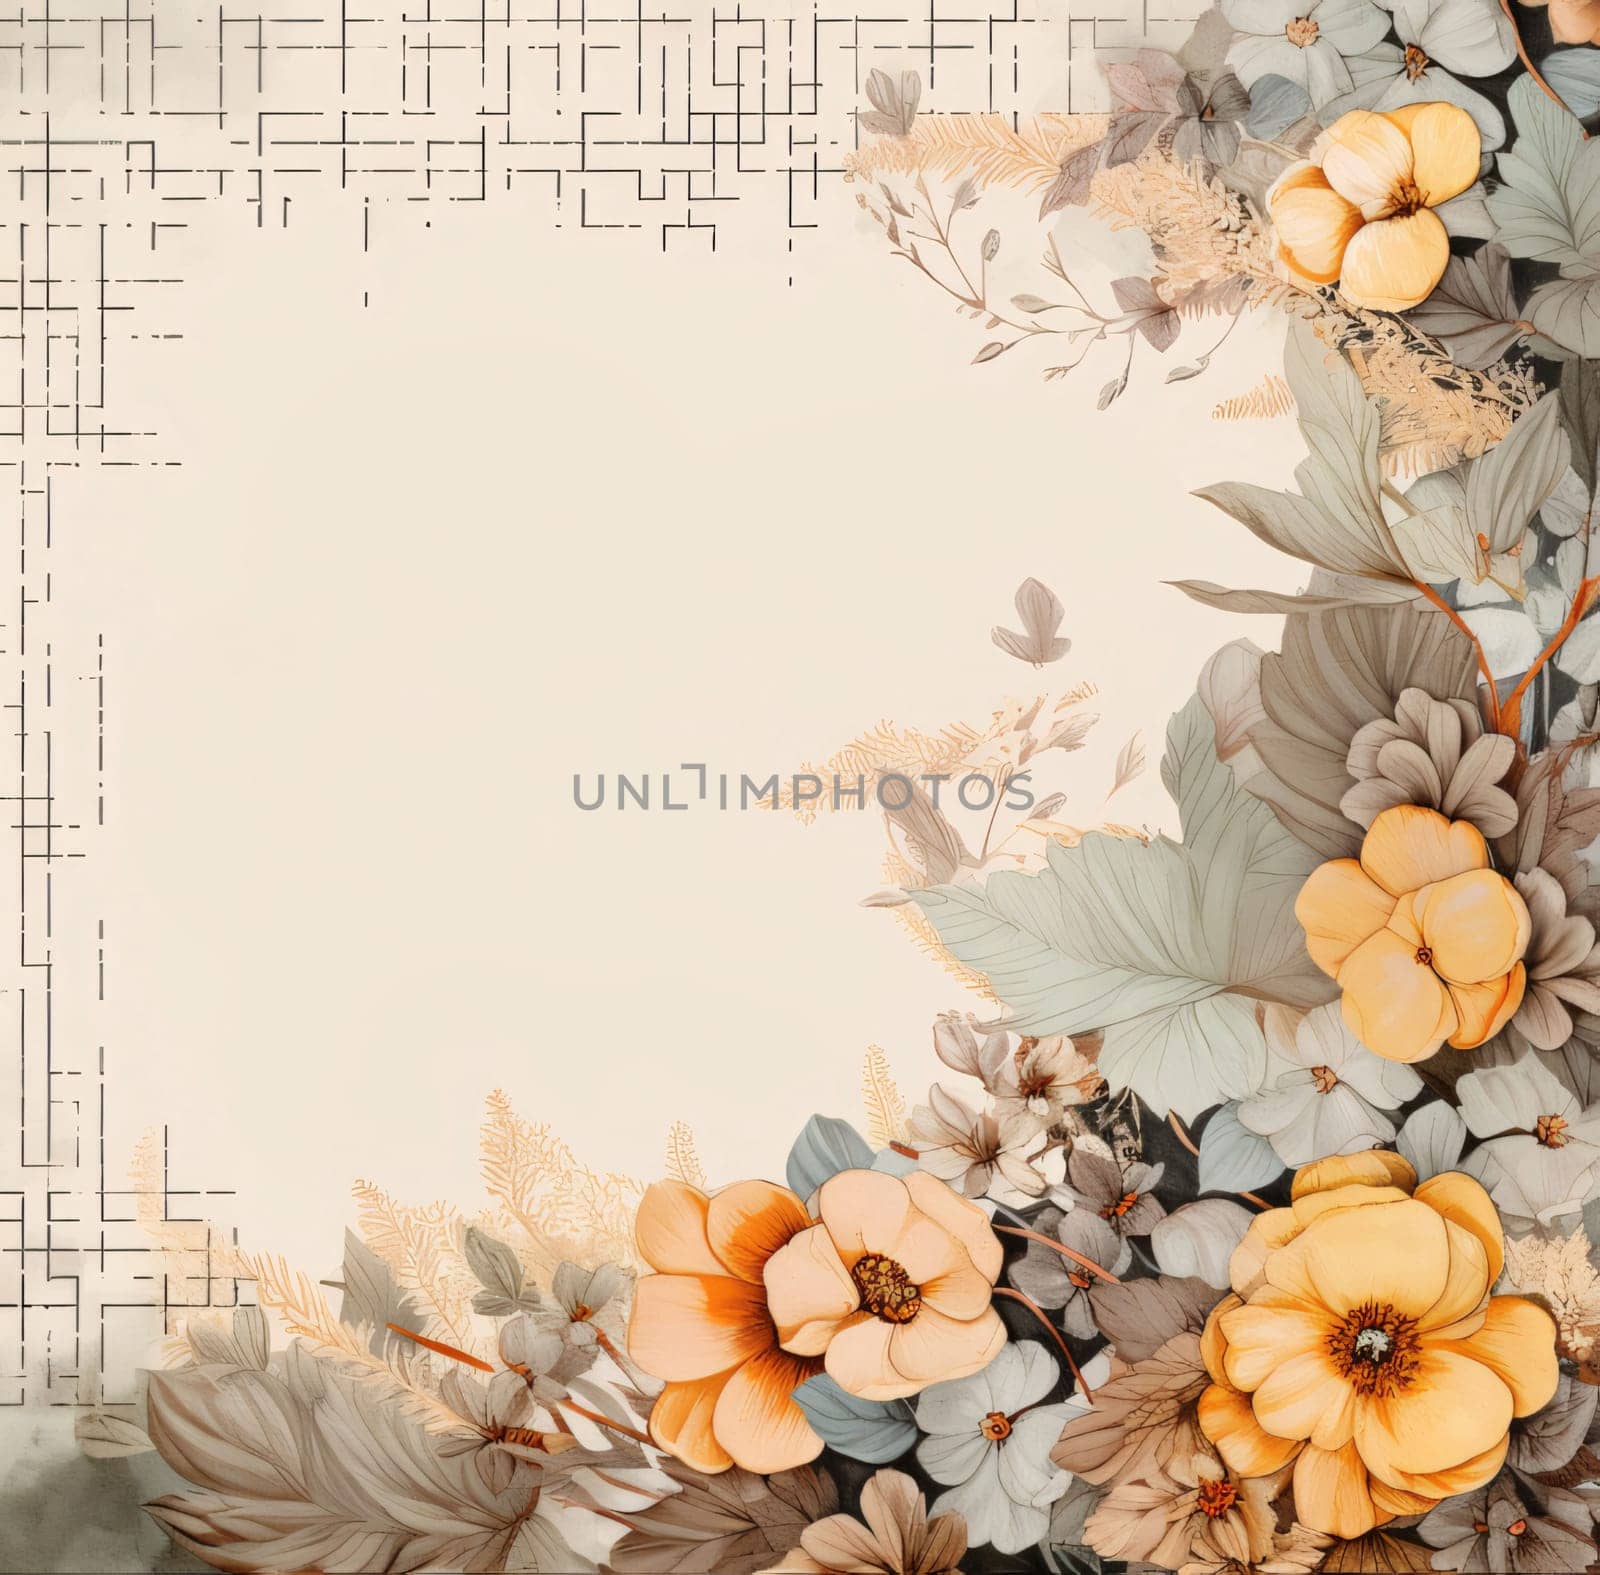 A white blank sheet of paper with space for your own content as an image. Decorations at the side with colorful flowers and leaves. Graphic with space for your own content.